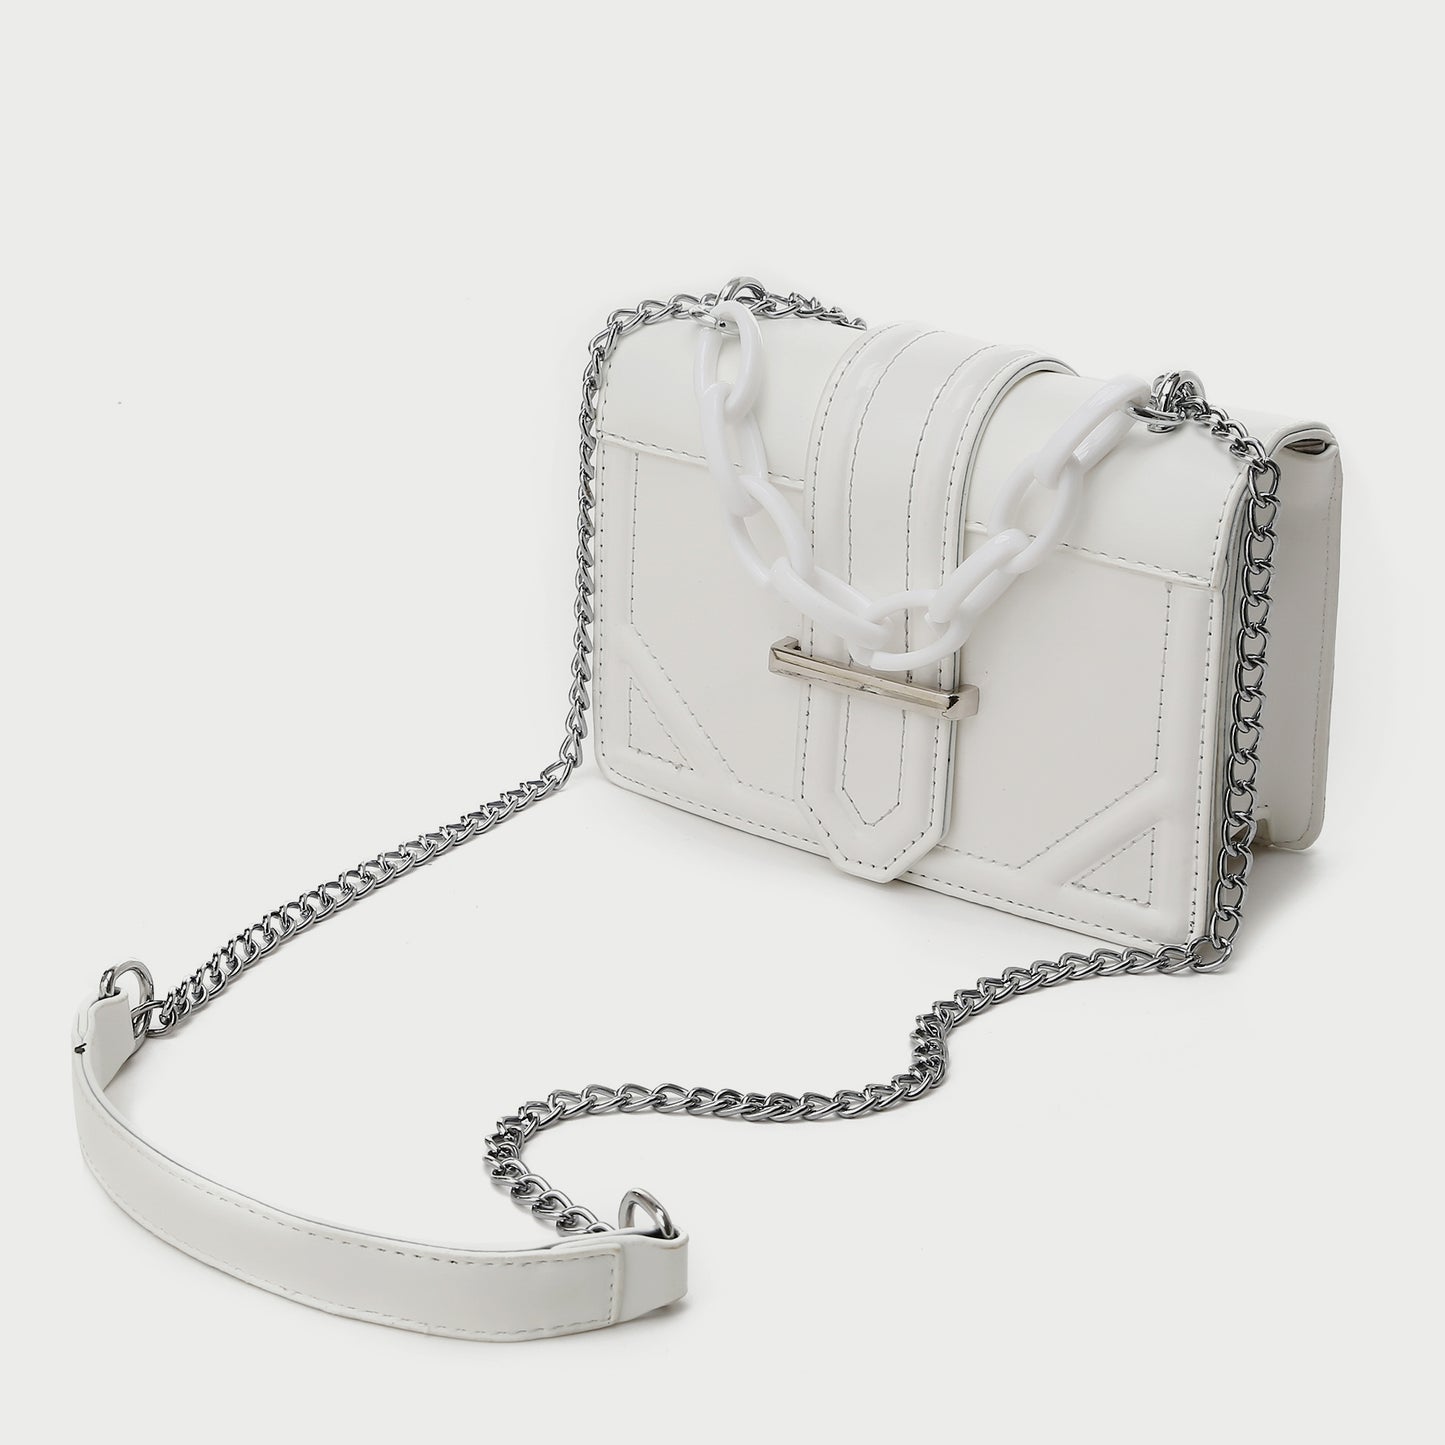 Contrast chain bordered flap PU leather crossbody bag